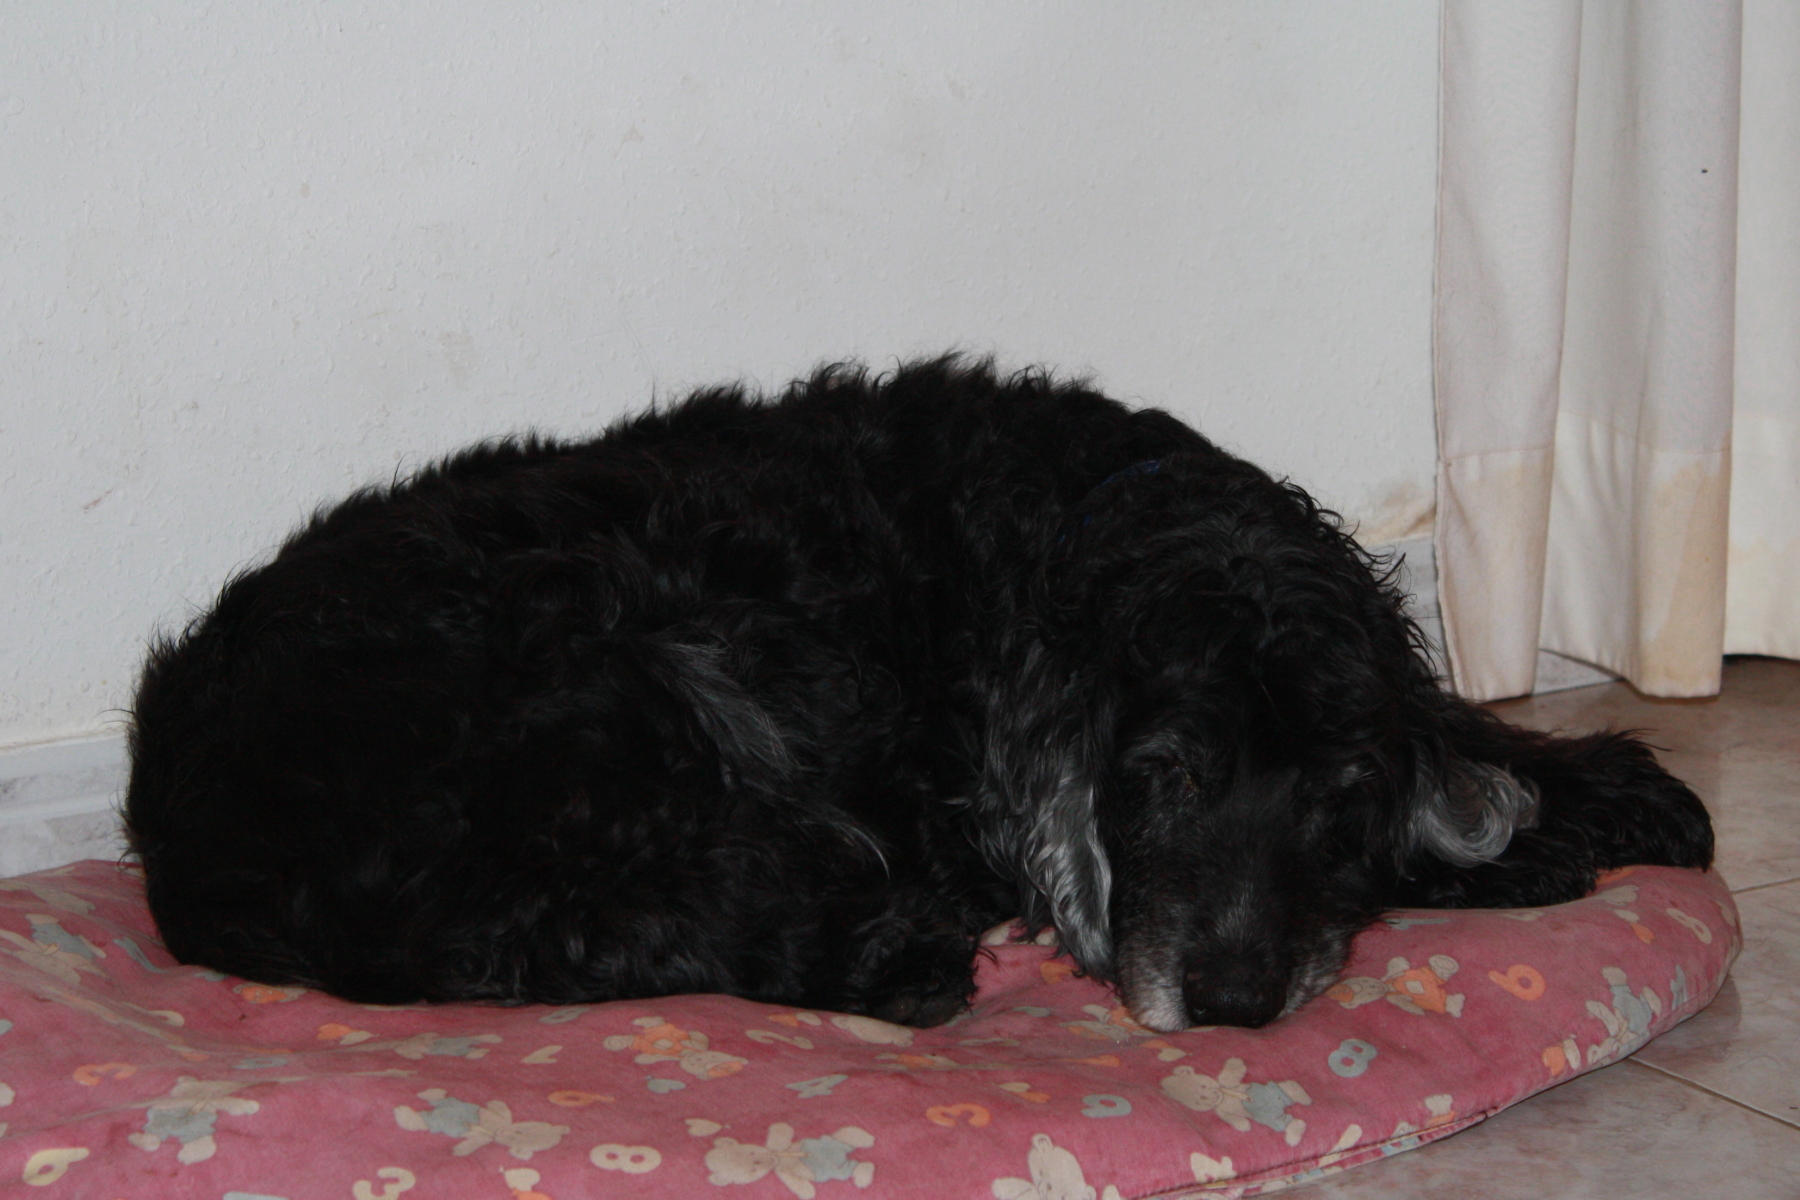 dog curled up asleep on his bed by the wall